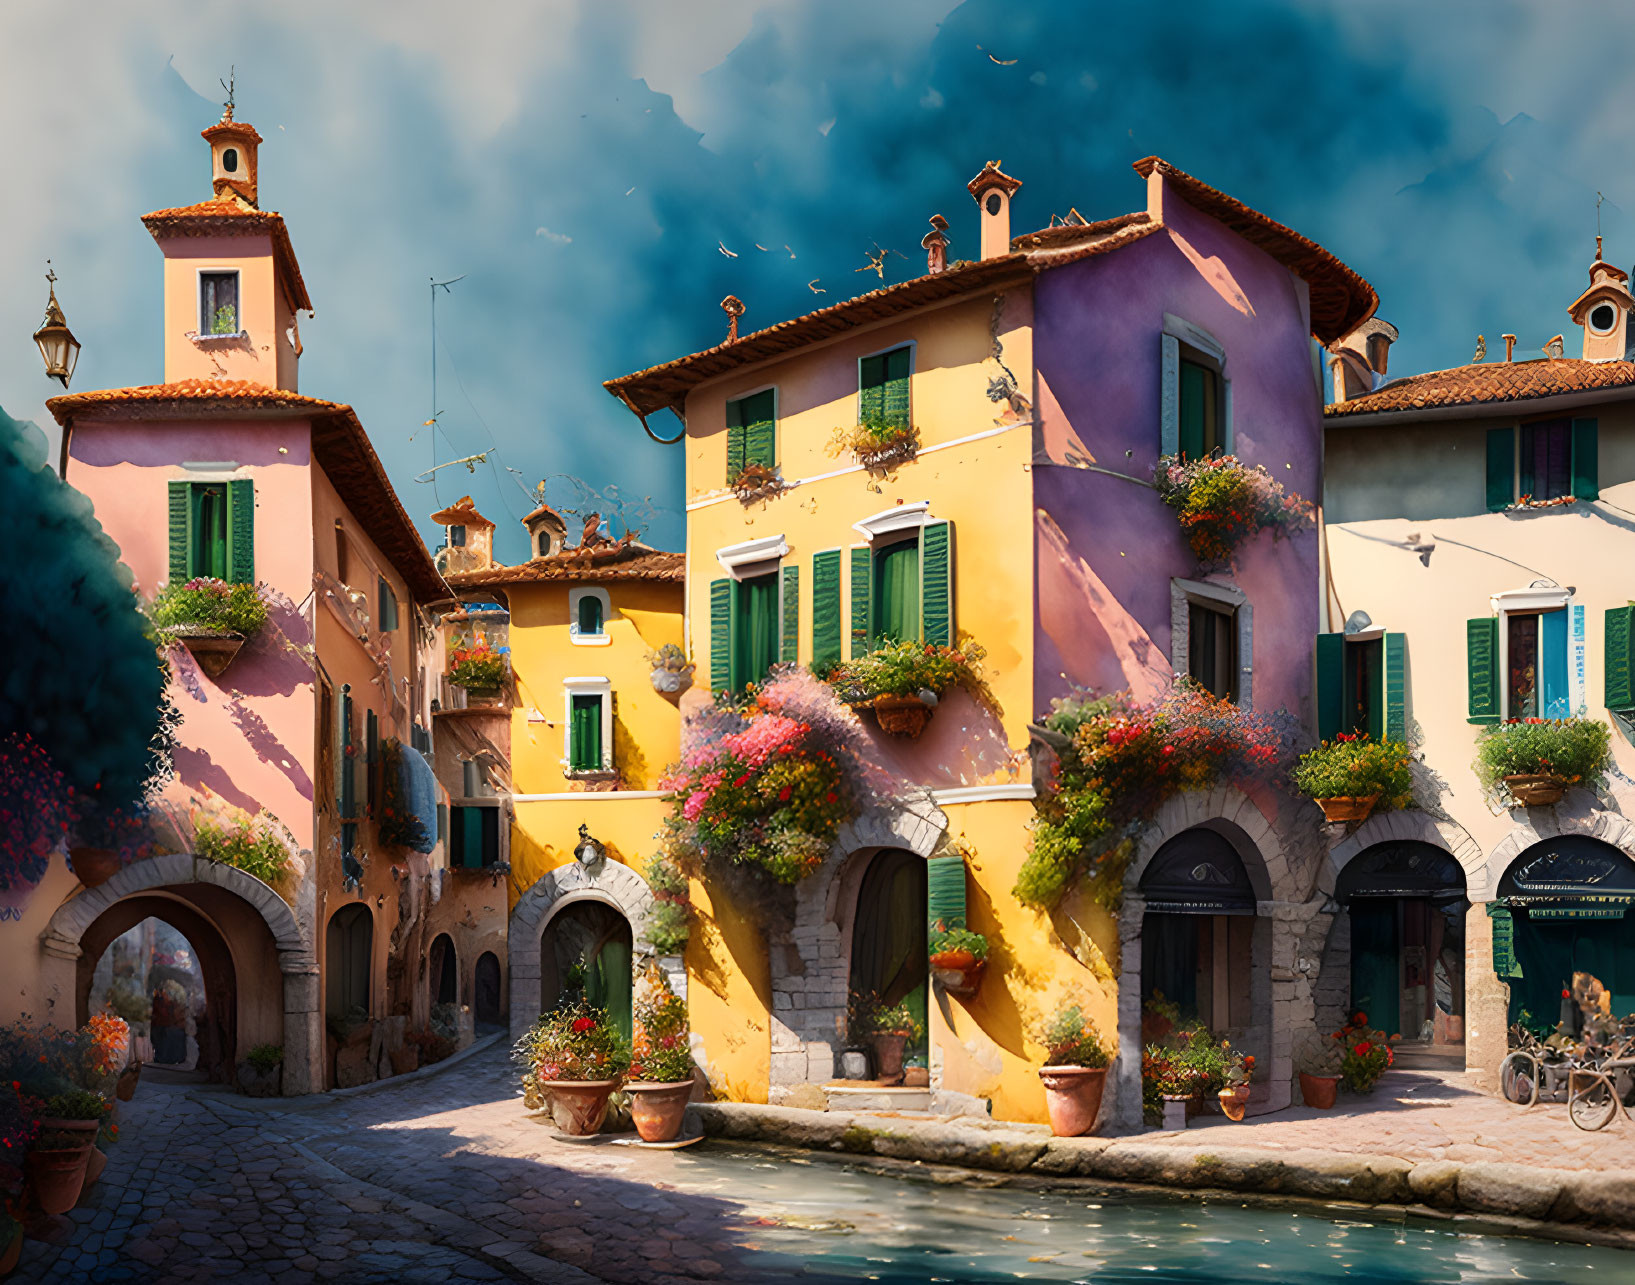 Picturesque European Street Scene with Colorful Houses and Flower Decorations